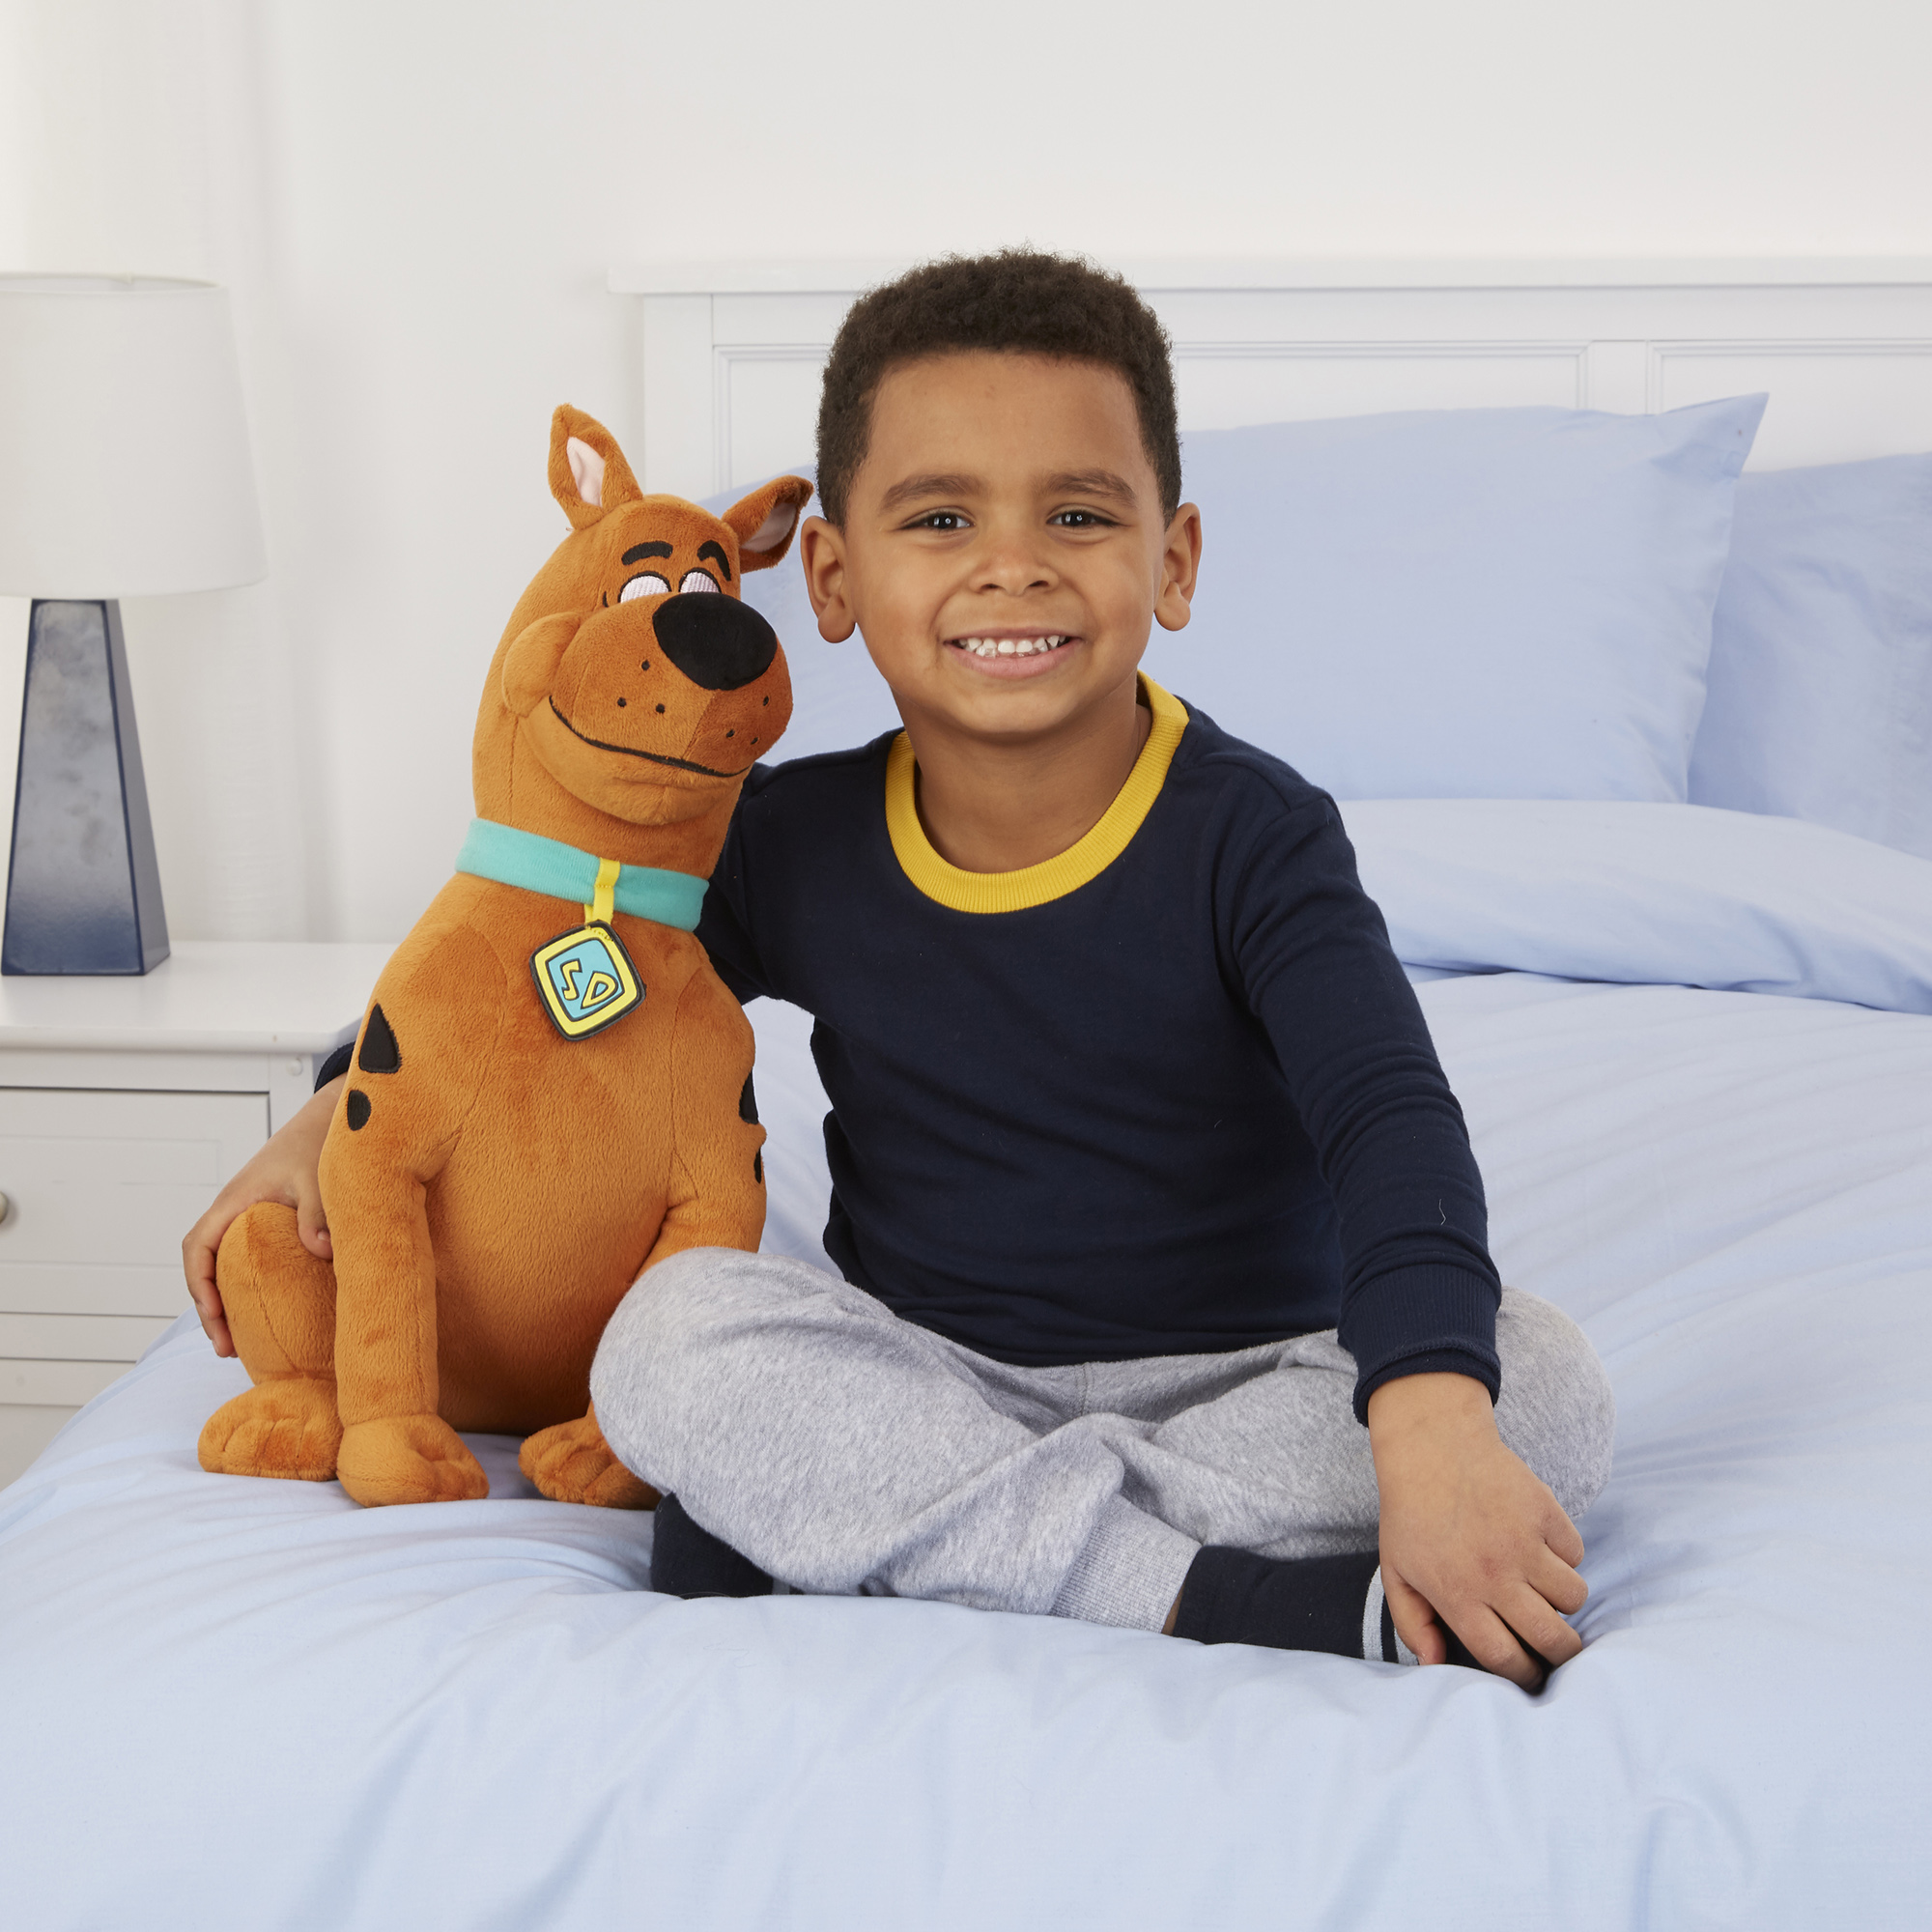 SCOOB! Scooby-Doo Kids Bedding Super Soft Plush Snuggle Cuddle Pillow, Scooby - image 3 of 6